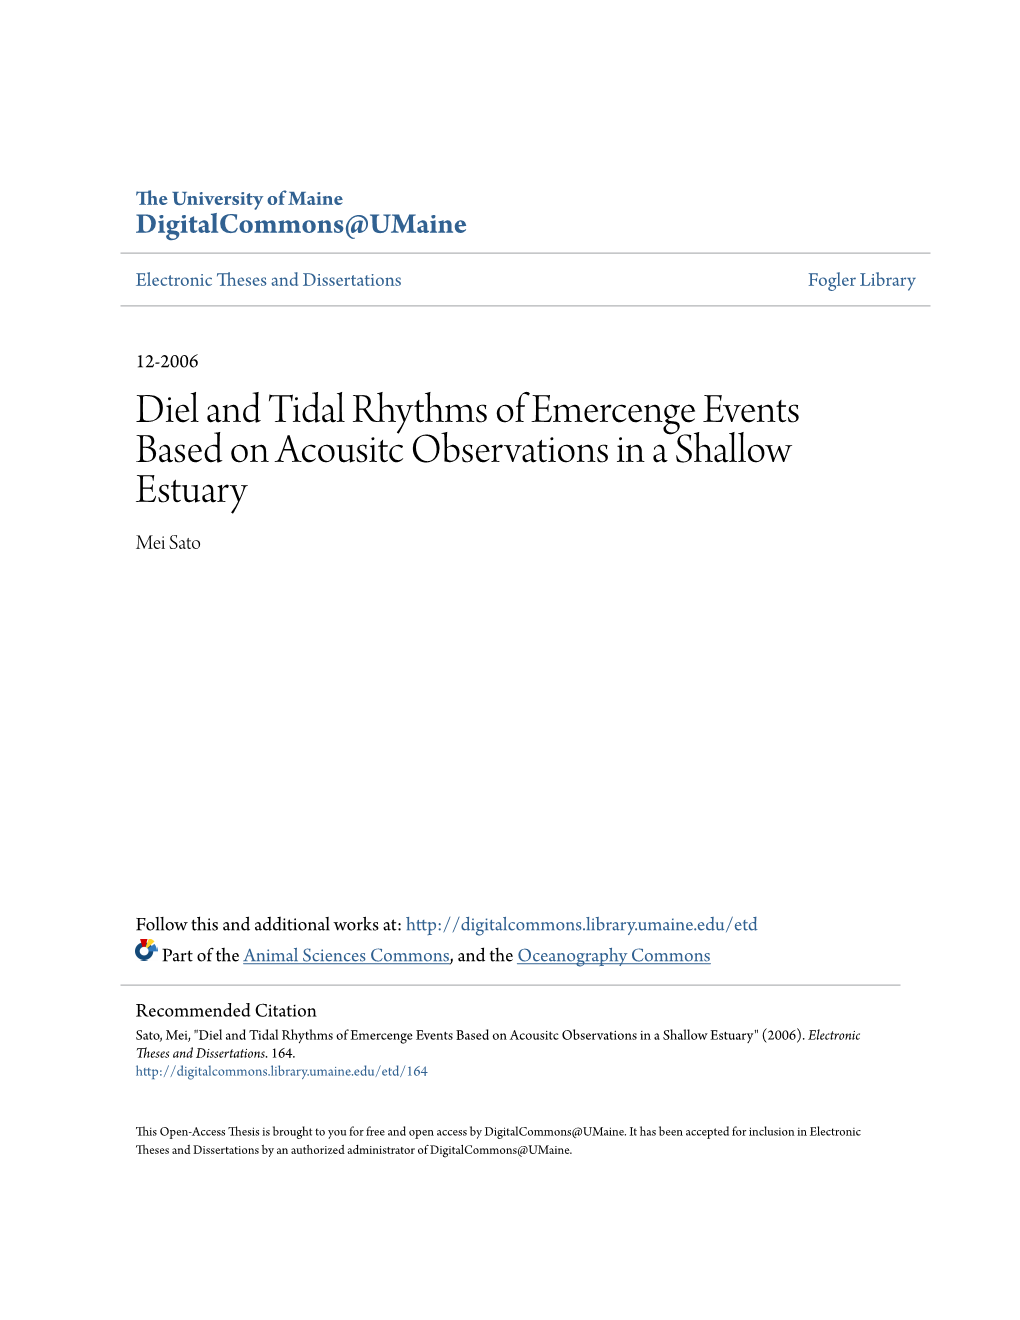 Diel and Tidal Rhythms of Emercenge Events Based on Acousitc Observations in a Shallow Estuary Mei Sato